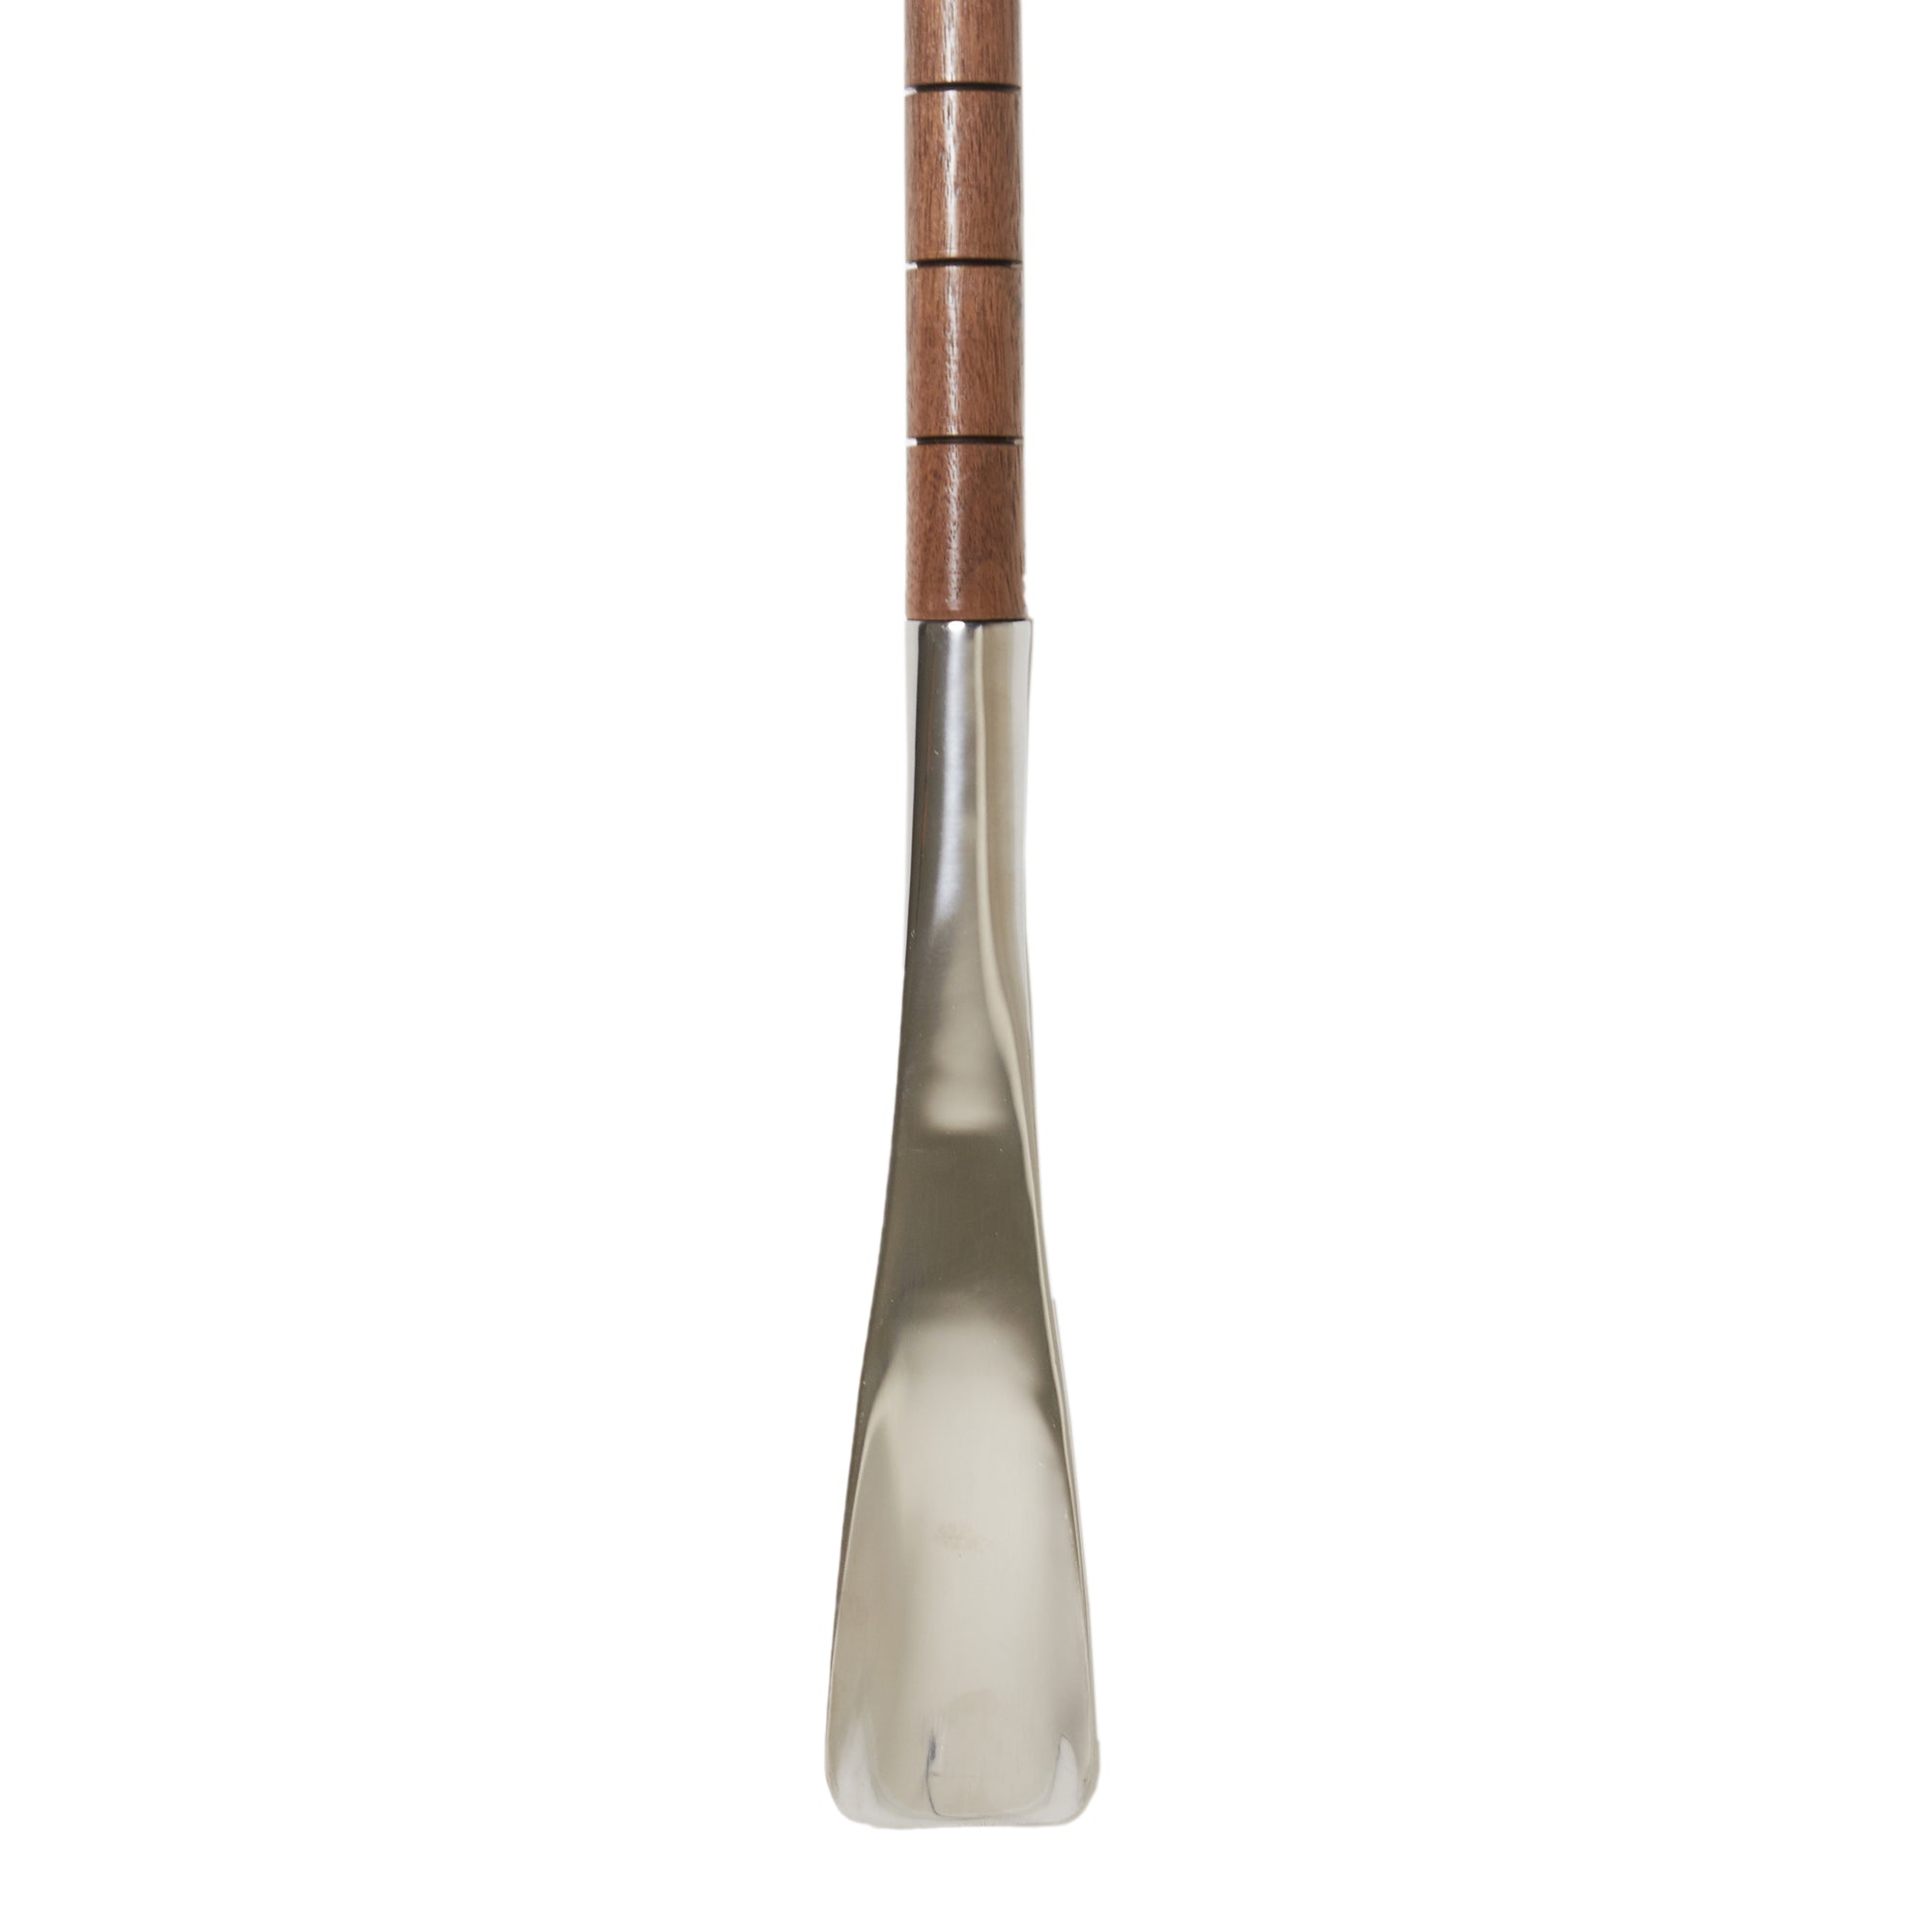 A KirbyAllison.com Walnut Full-Length Shoe Horn with a glossy finish on a white background.